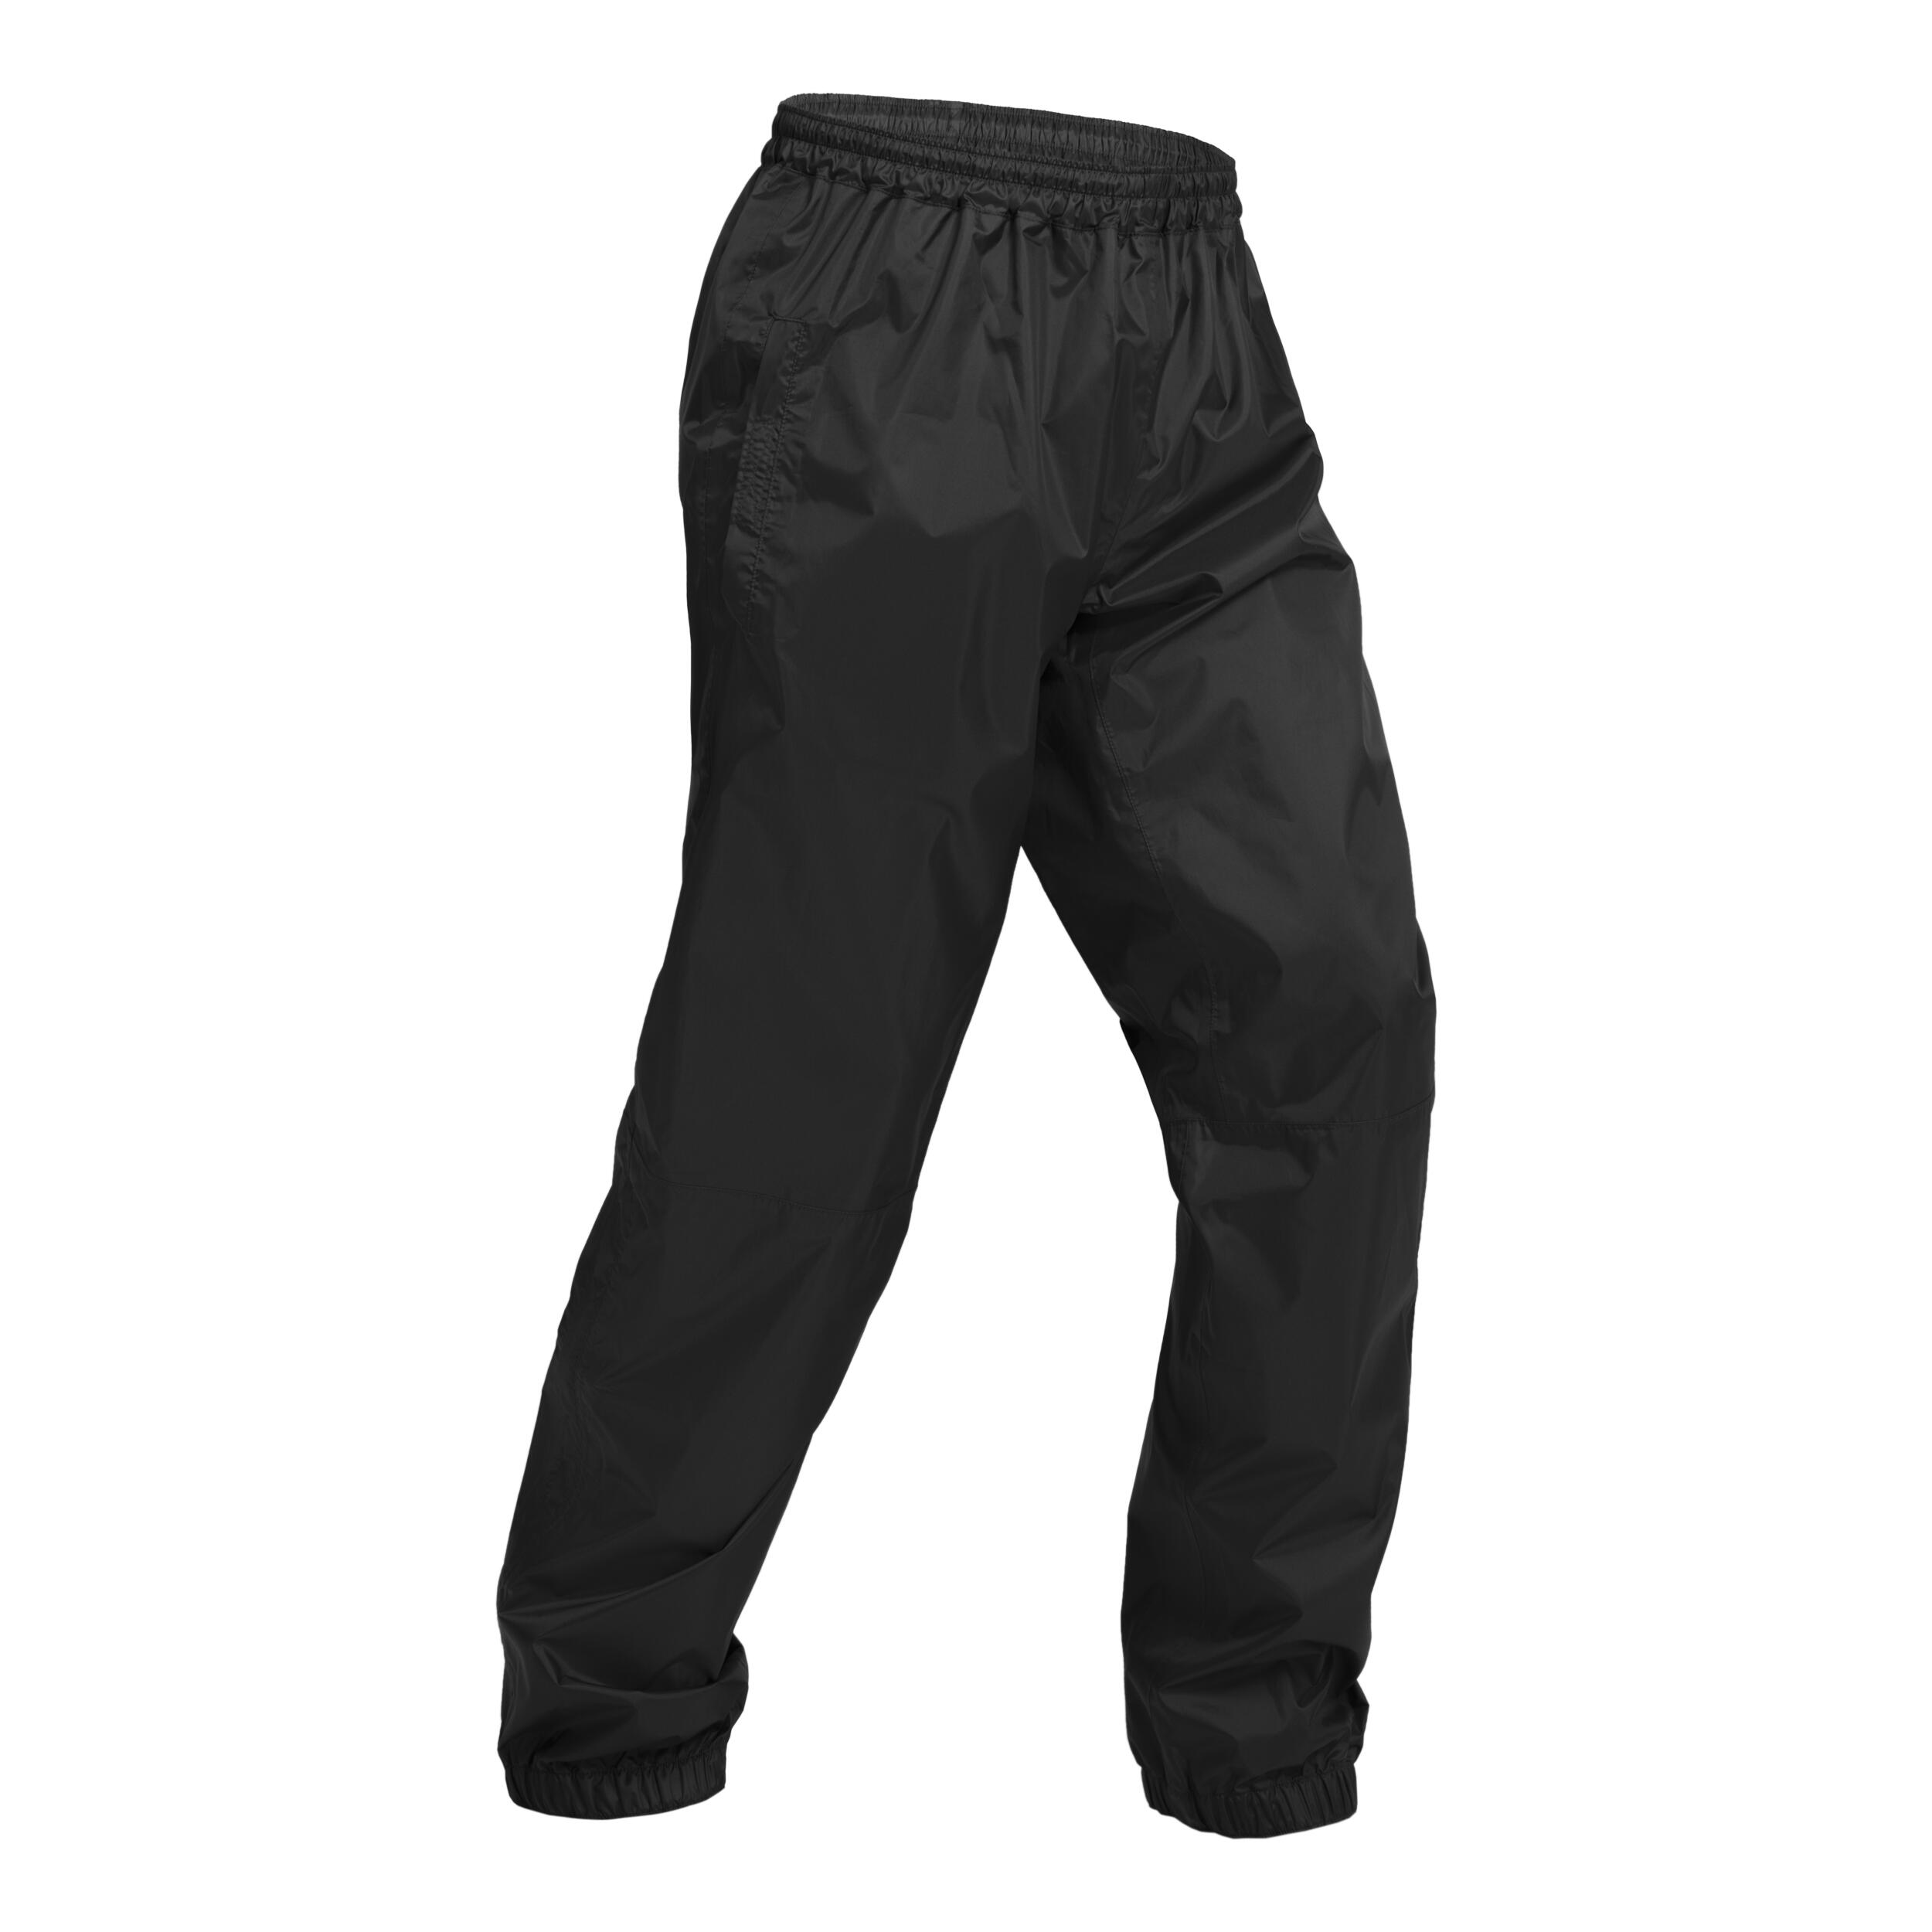 QUECHUA by Decathlon Relaxed Men Grey Trousers - Buy QUECHUA by Decathlon  Relaxed Men Grey Trousers Online at Best Prices in India | Flipkart.com